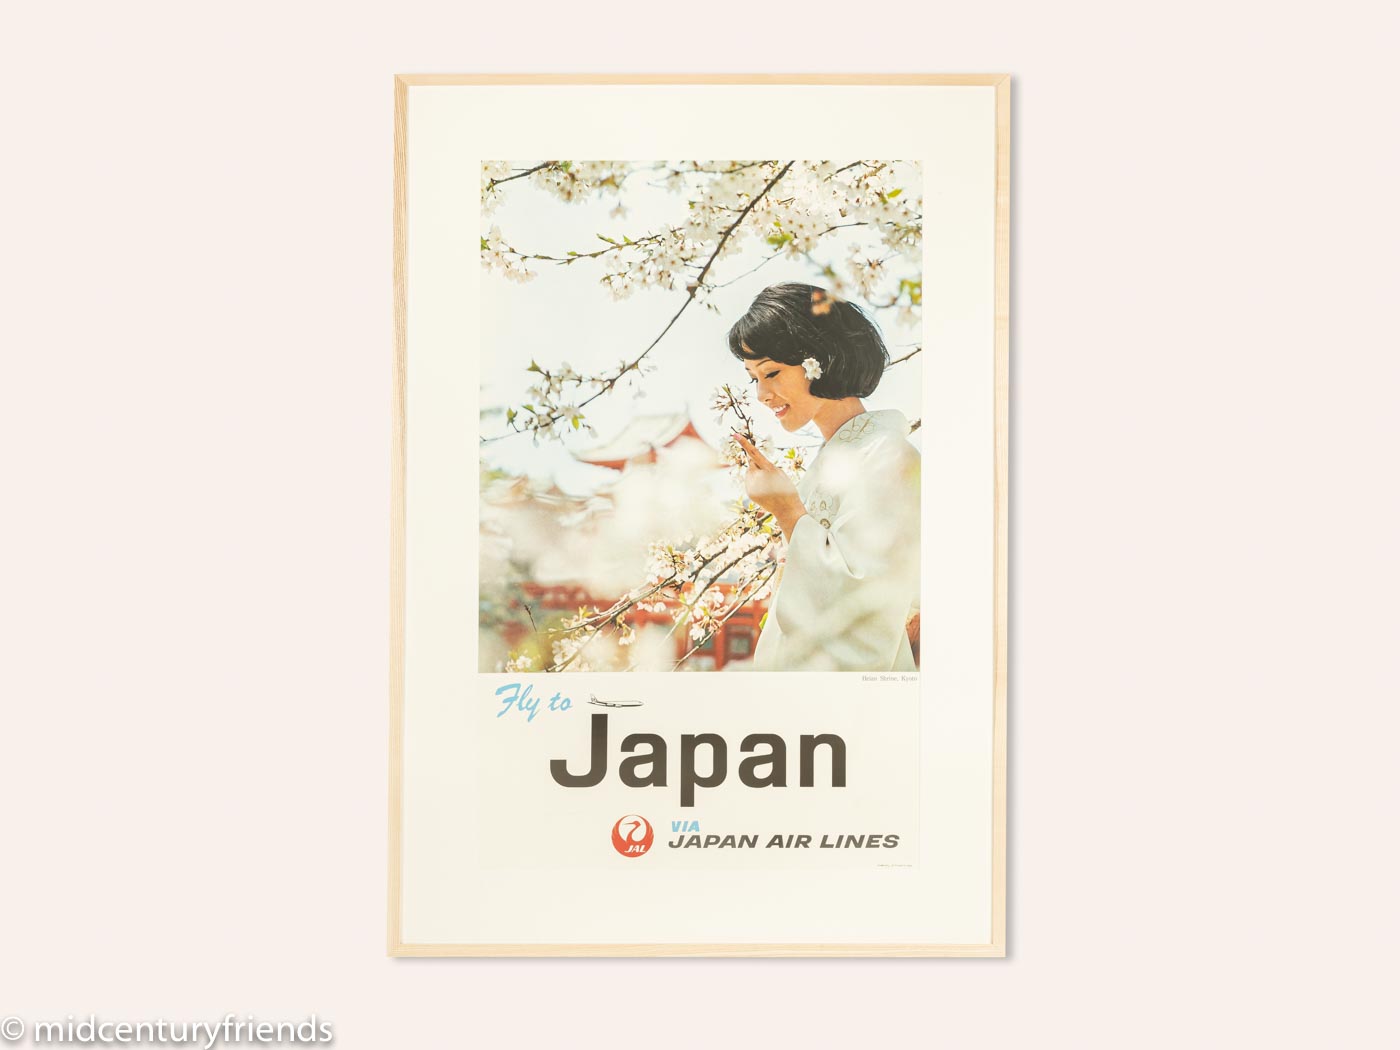 1960er Jahre Poster „Fly to Japan“